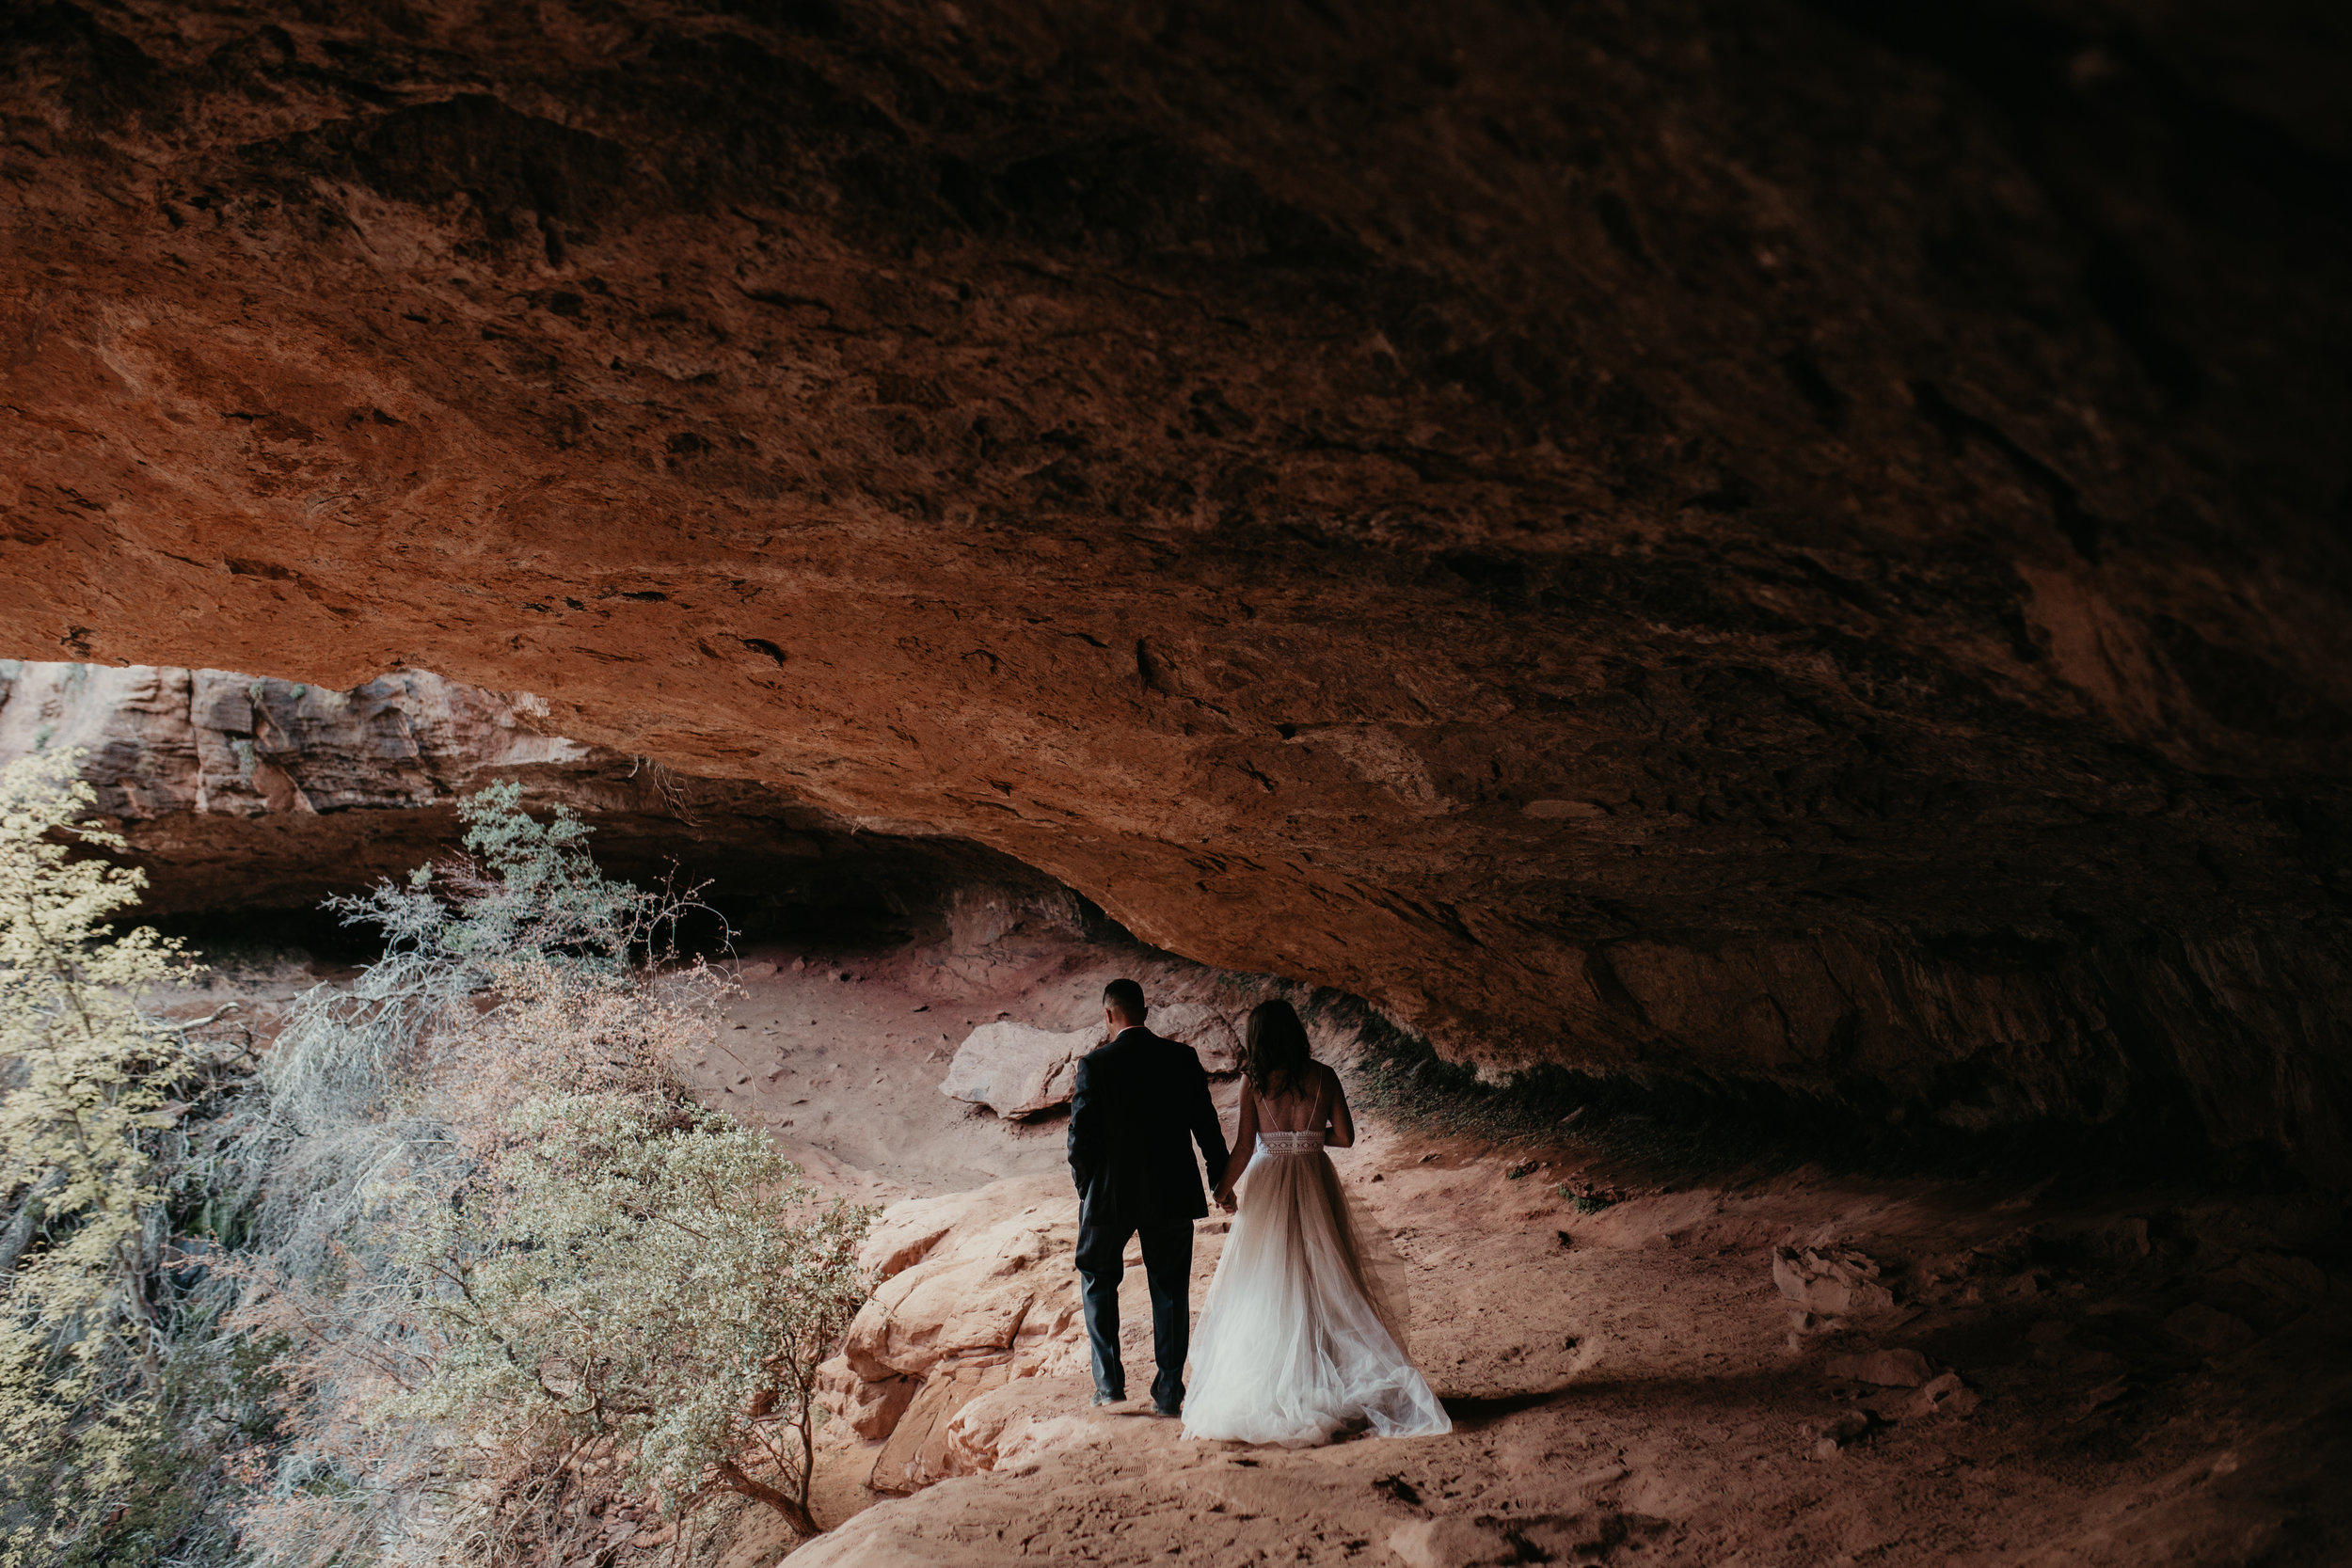 nicole-daacke-photography-zion-national-park-elopement-photographer-canyon-overlook-trail-elope-hiking-adventure-wedding-photos-fall-utah-red-rock-canyon-stgeorge-eloping-photographer-34.jpg